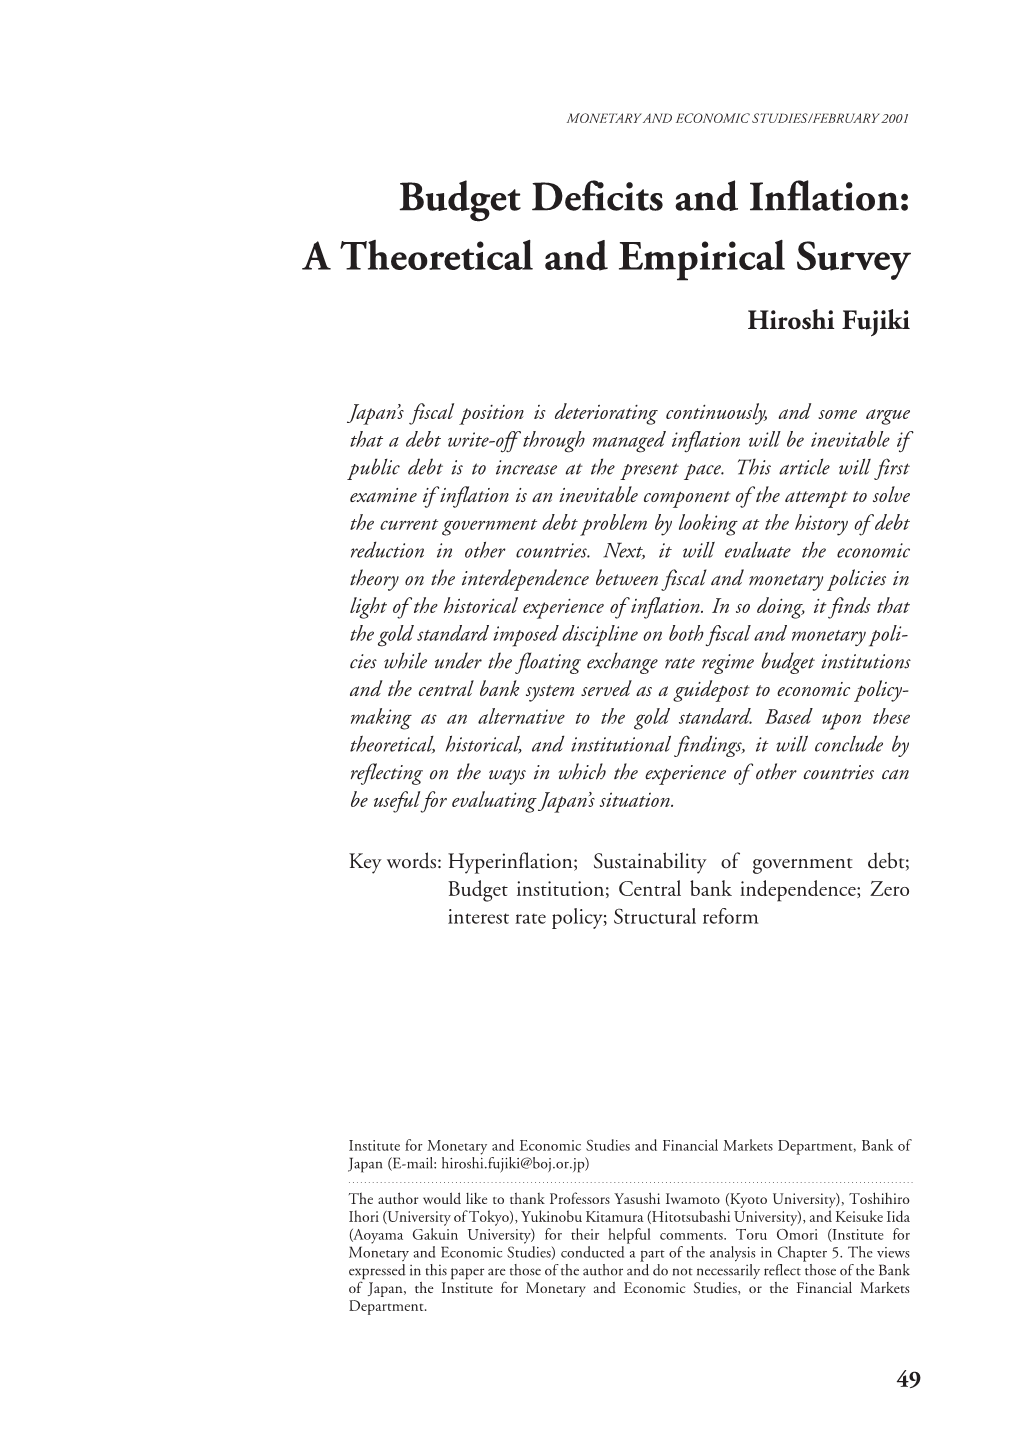 Budget Deficits and Inflation: a Theoretical and Empirical Survey